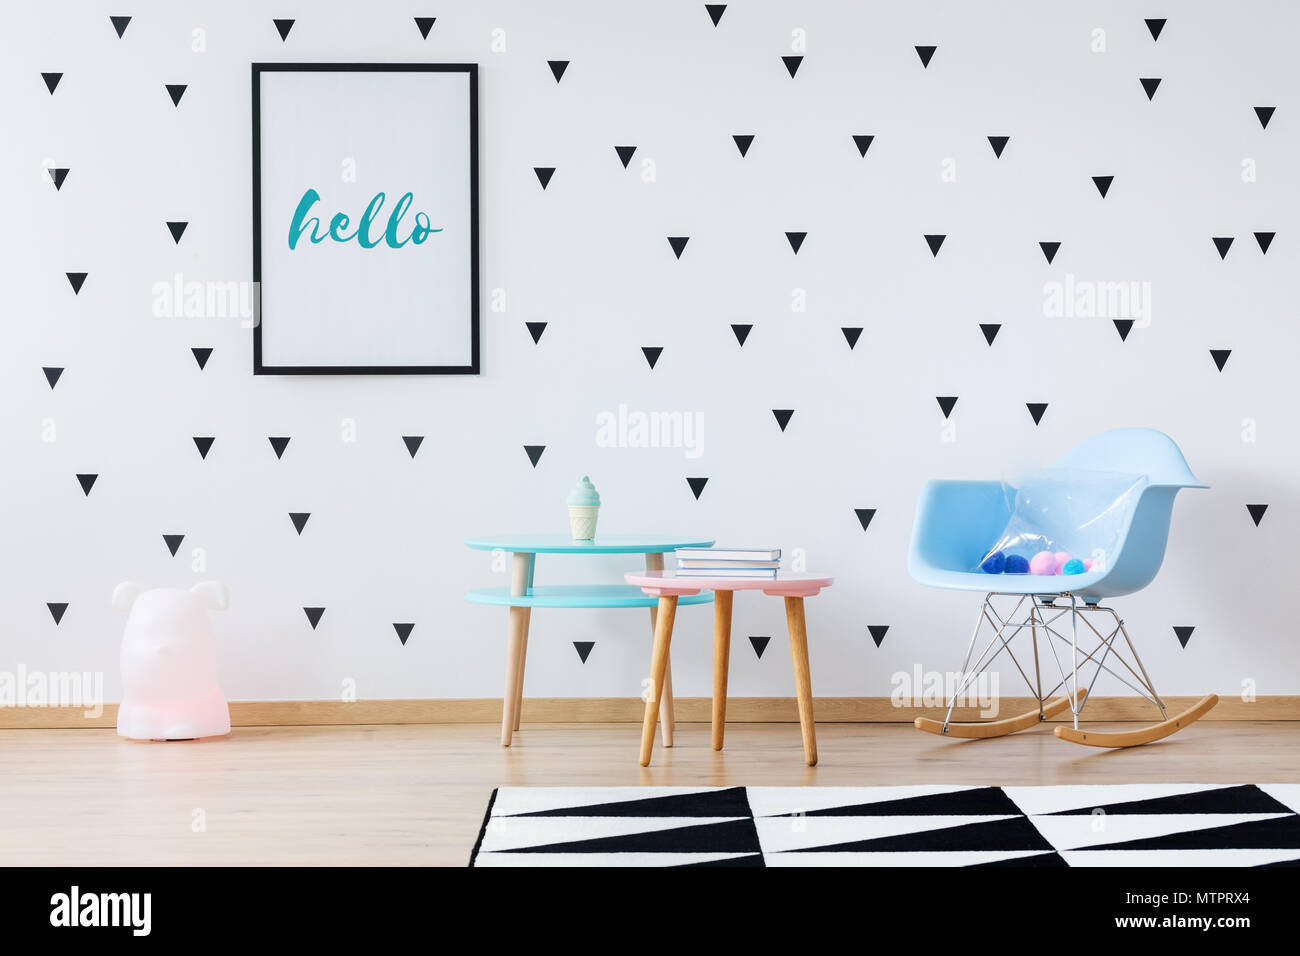 Toys on blue rocking chair next to wooden tables against wallpaper with black triangles in a play room with geometric carpet Stock Photo